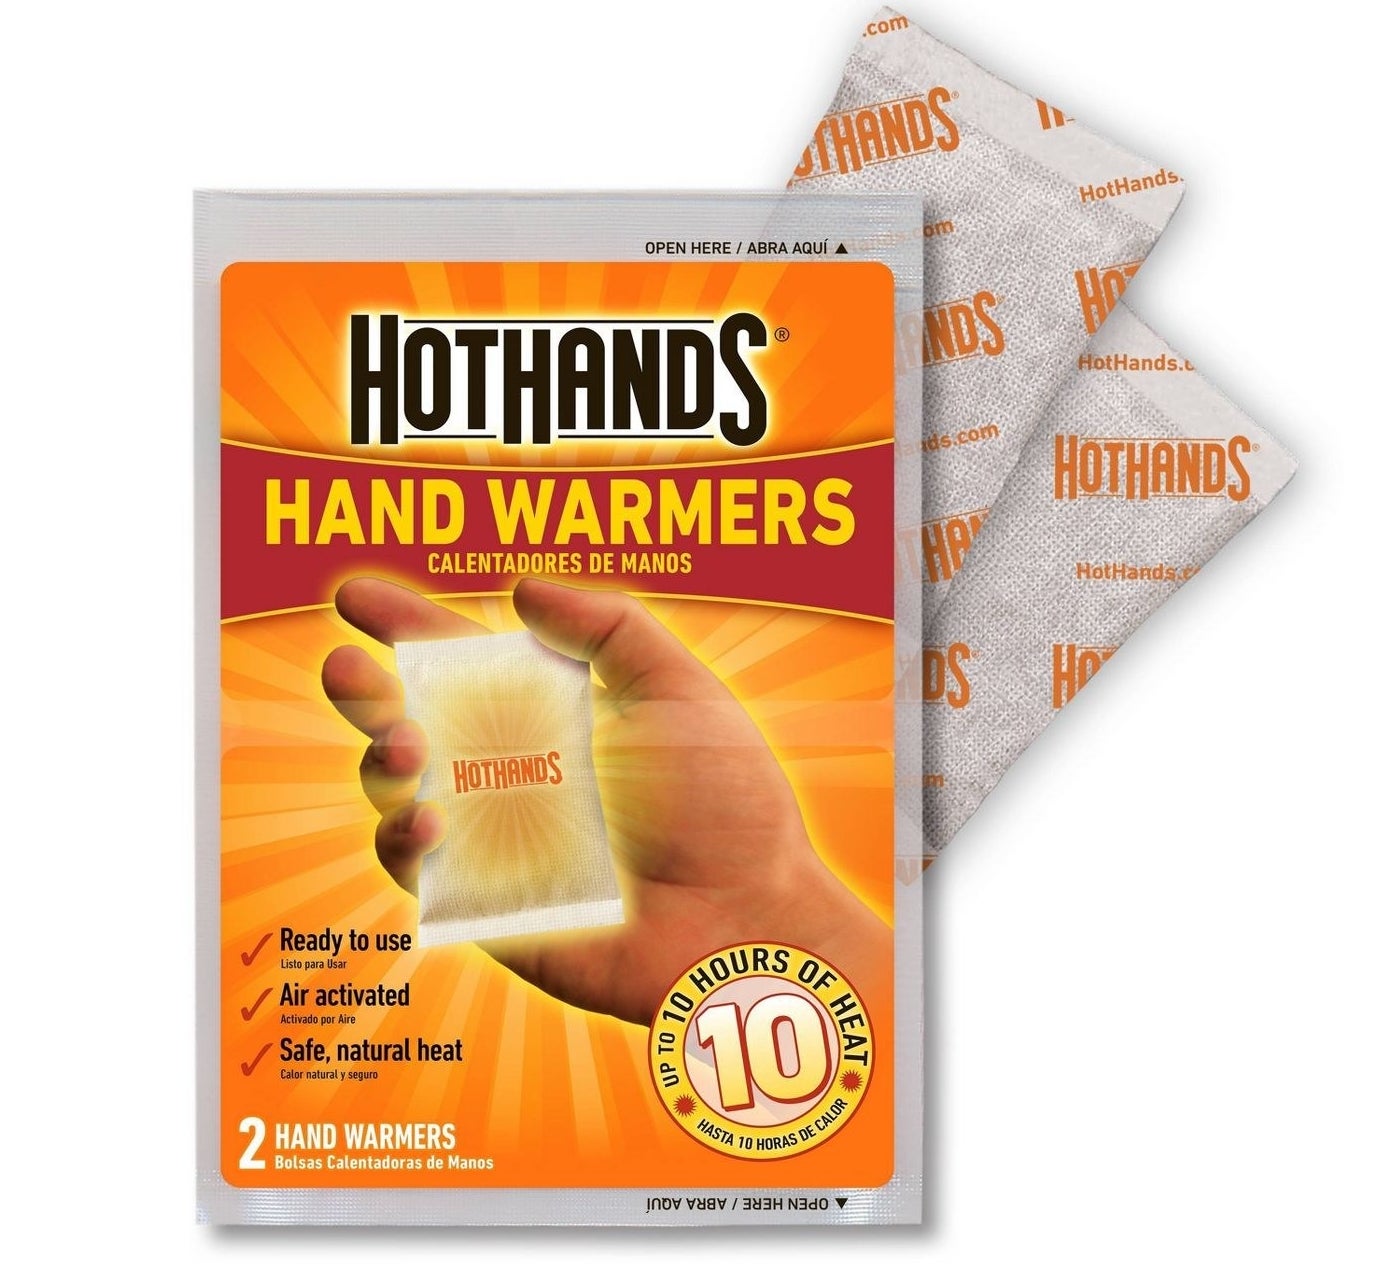 The pack of hand warmers